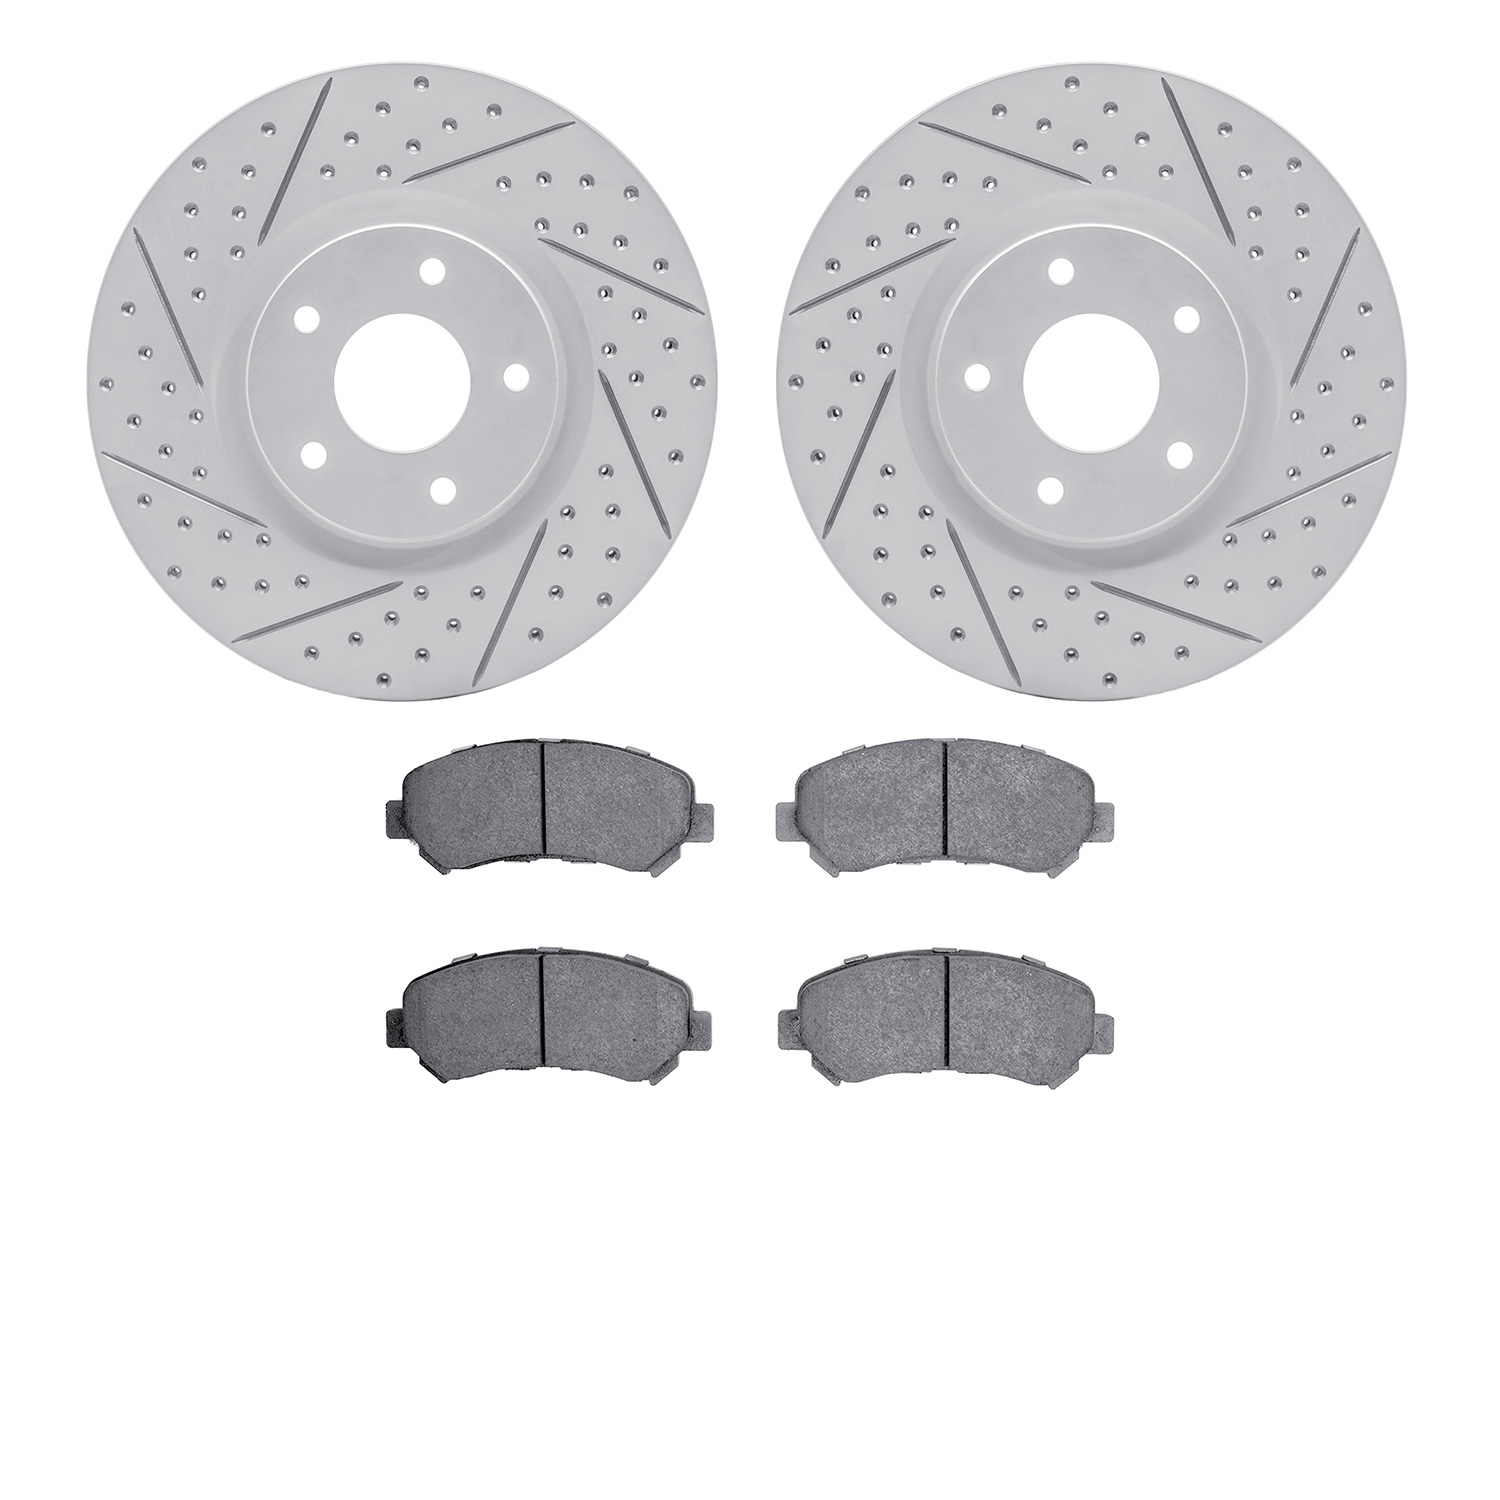 2502-67117 Geoperformance Drilled/Slotted Rotors w/5000 Advanced Brake Pads Kit, 2007-2017 Infiniti/Nissan, Position: Front